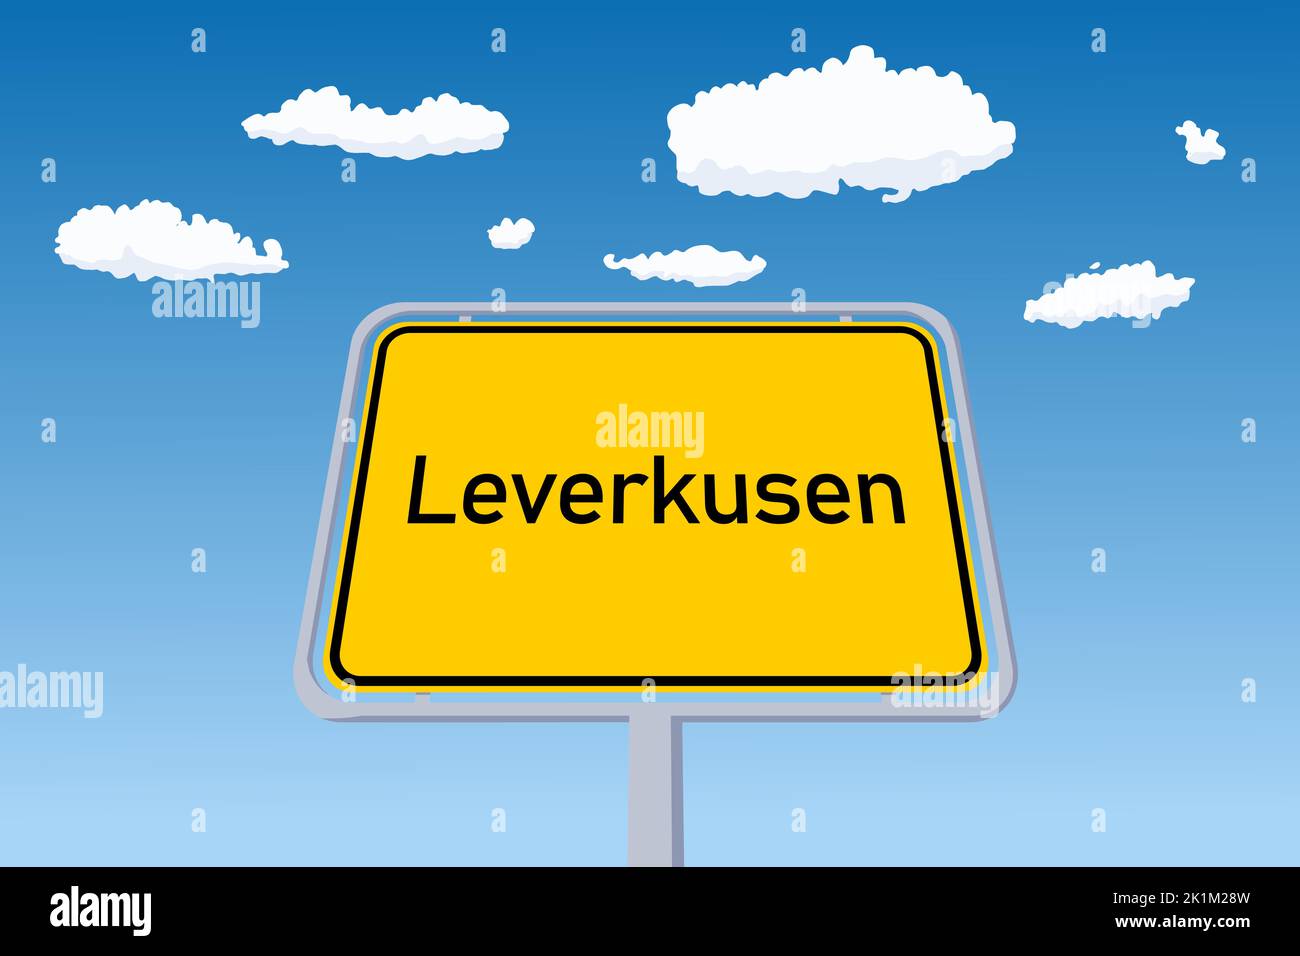 Leverkusen city sign in Germany. City limit welcome road sign vector illustration. Stock Vector